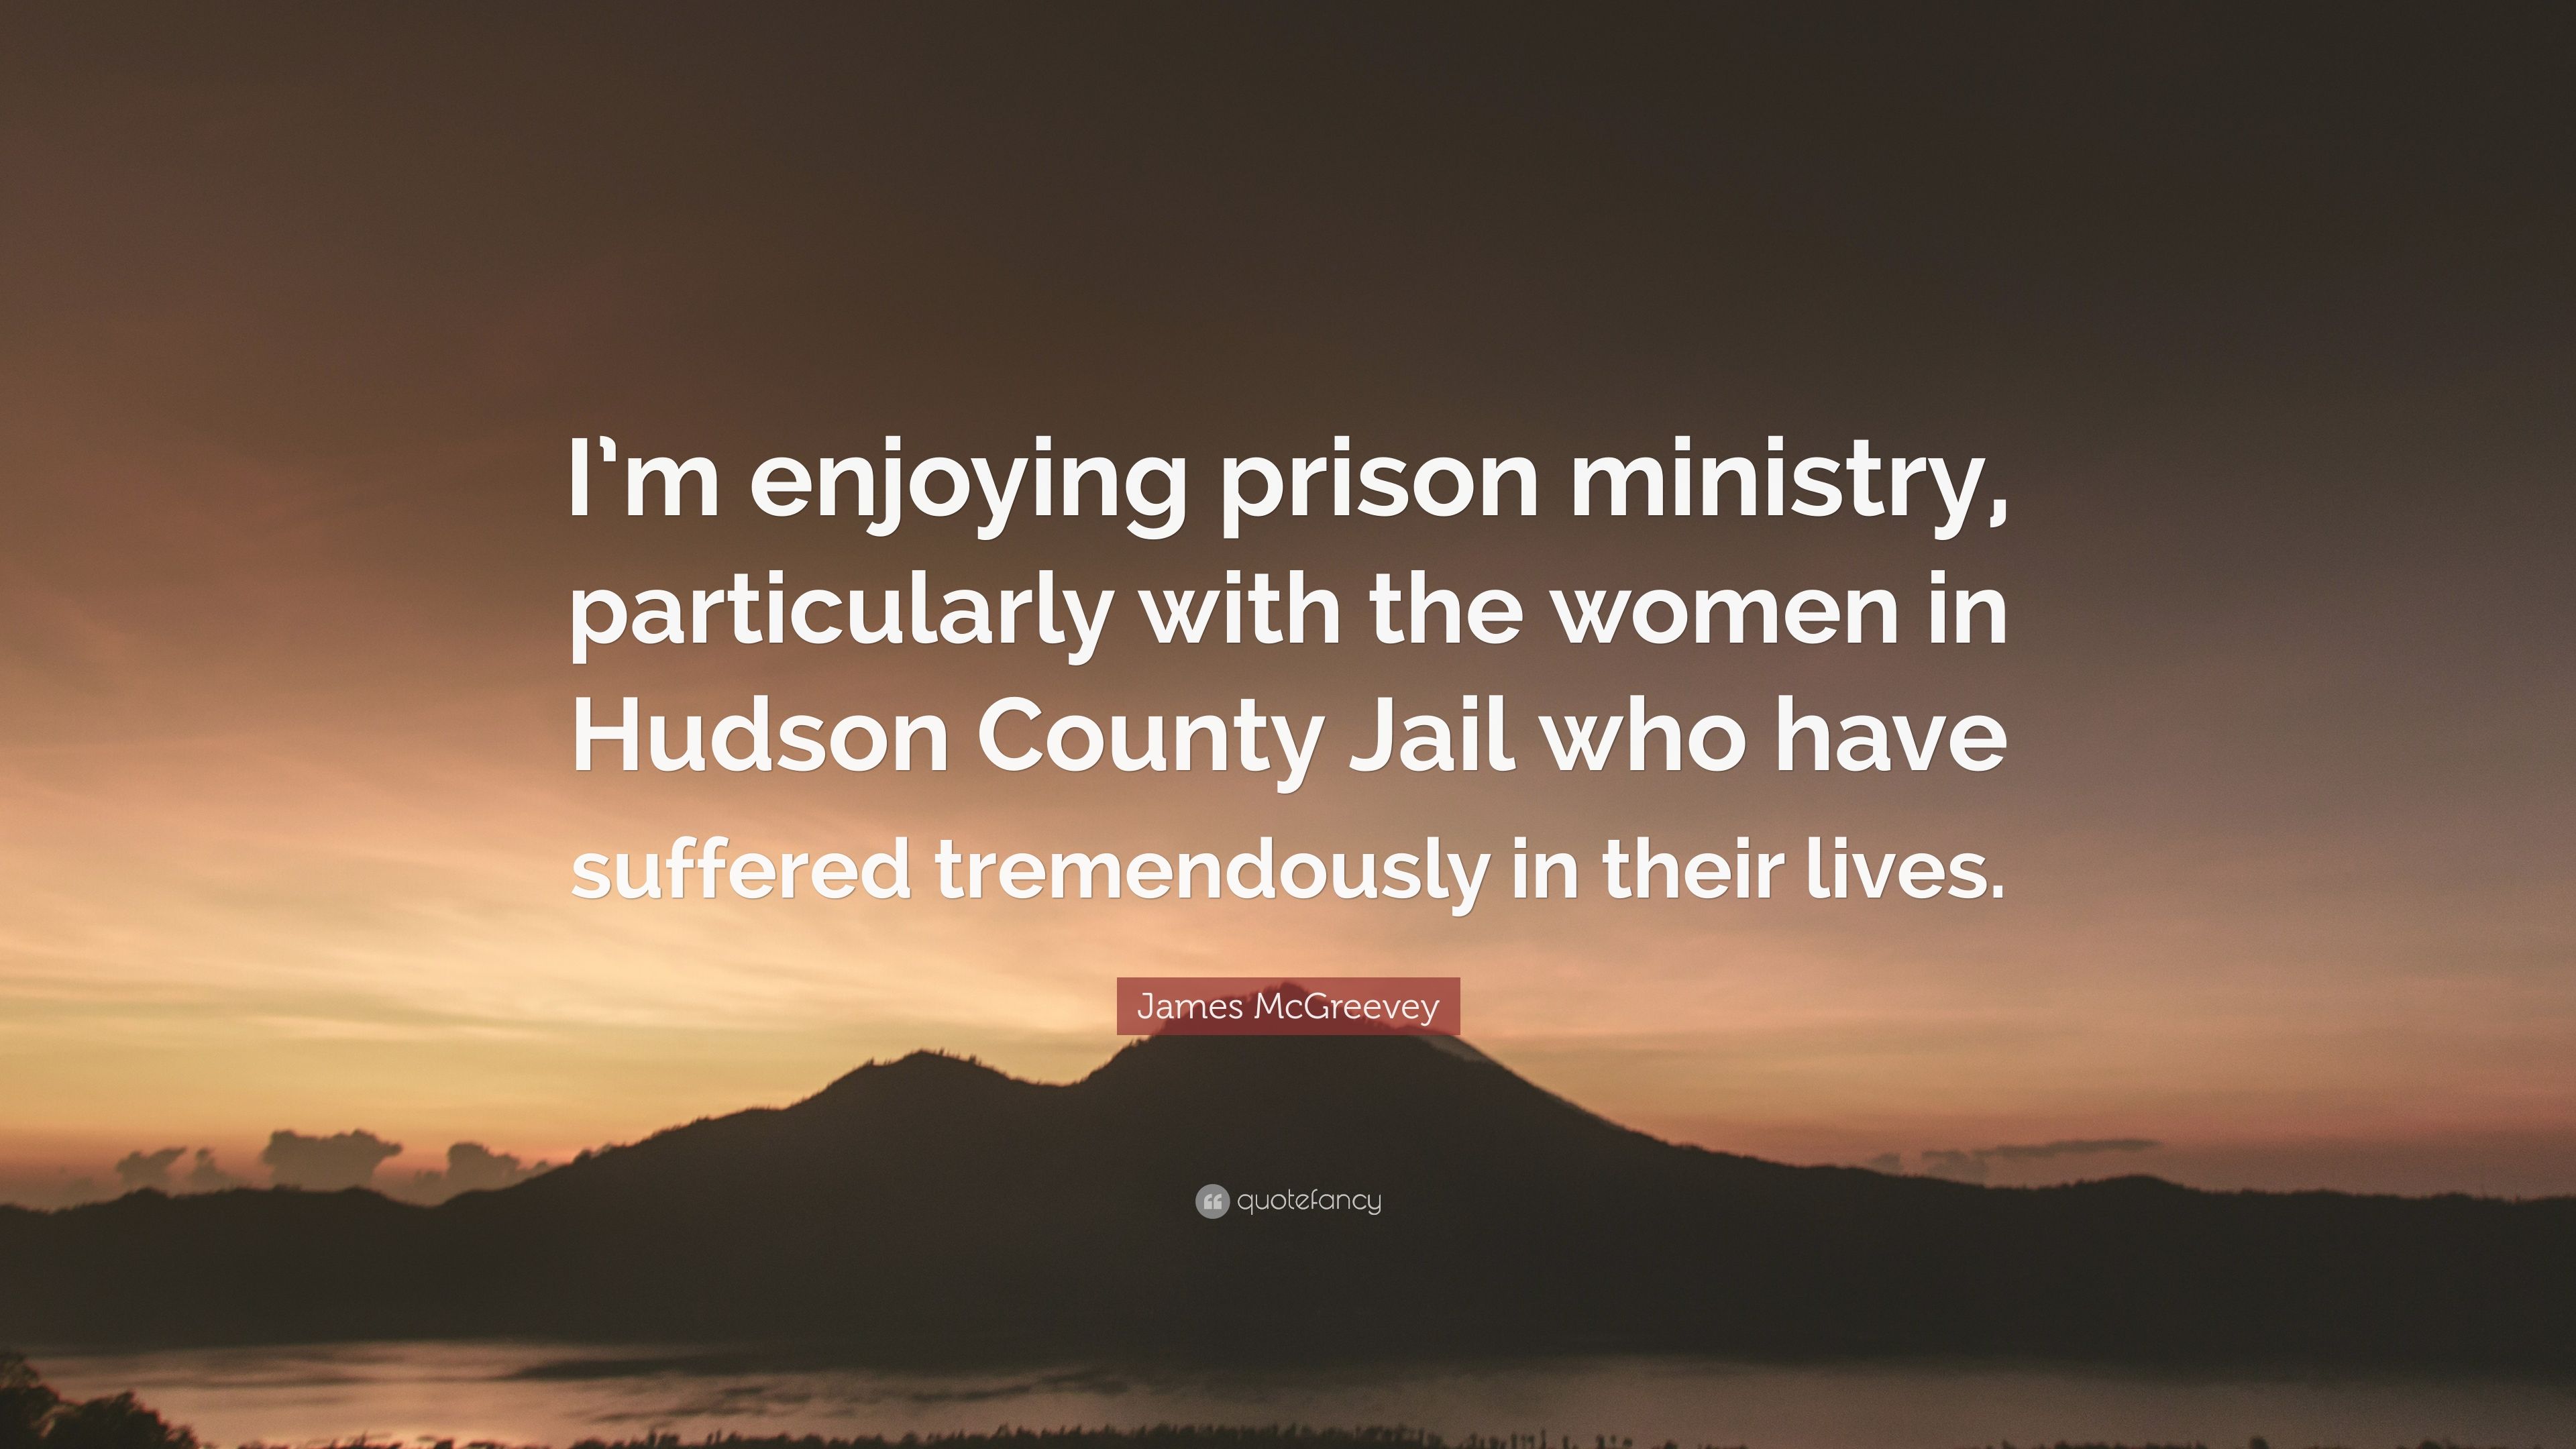 James McGreevey Quote: “I'm enjoying prison ministry, particularly with the women in Hudson County Jail who have suffered tremendously in their .” (7 wallpaper)